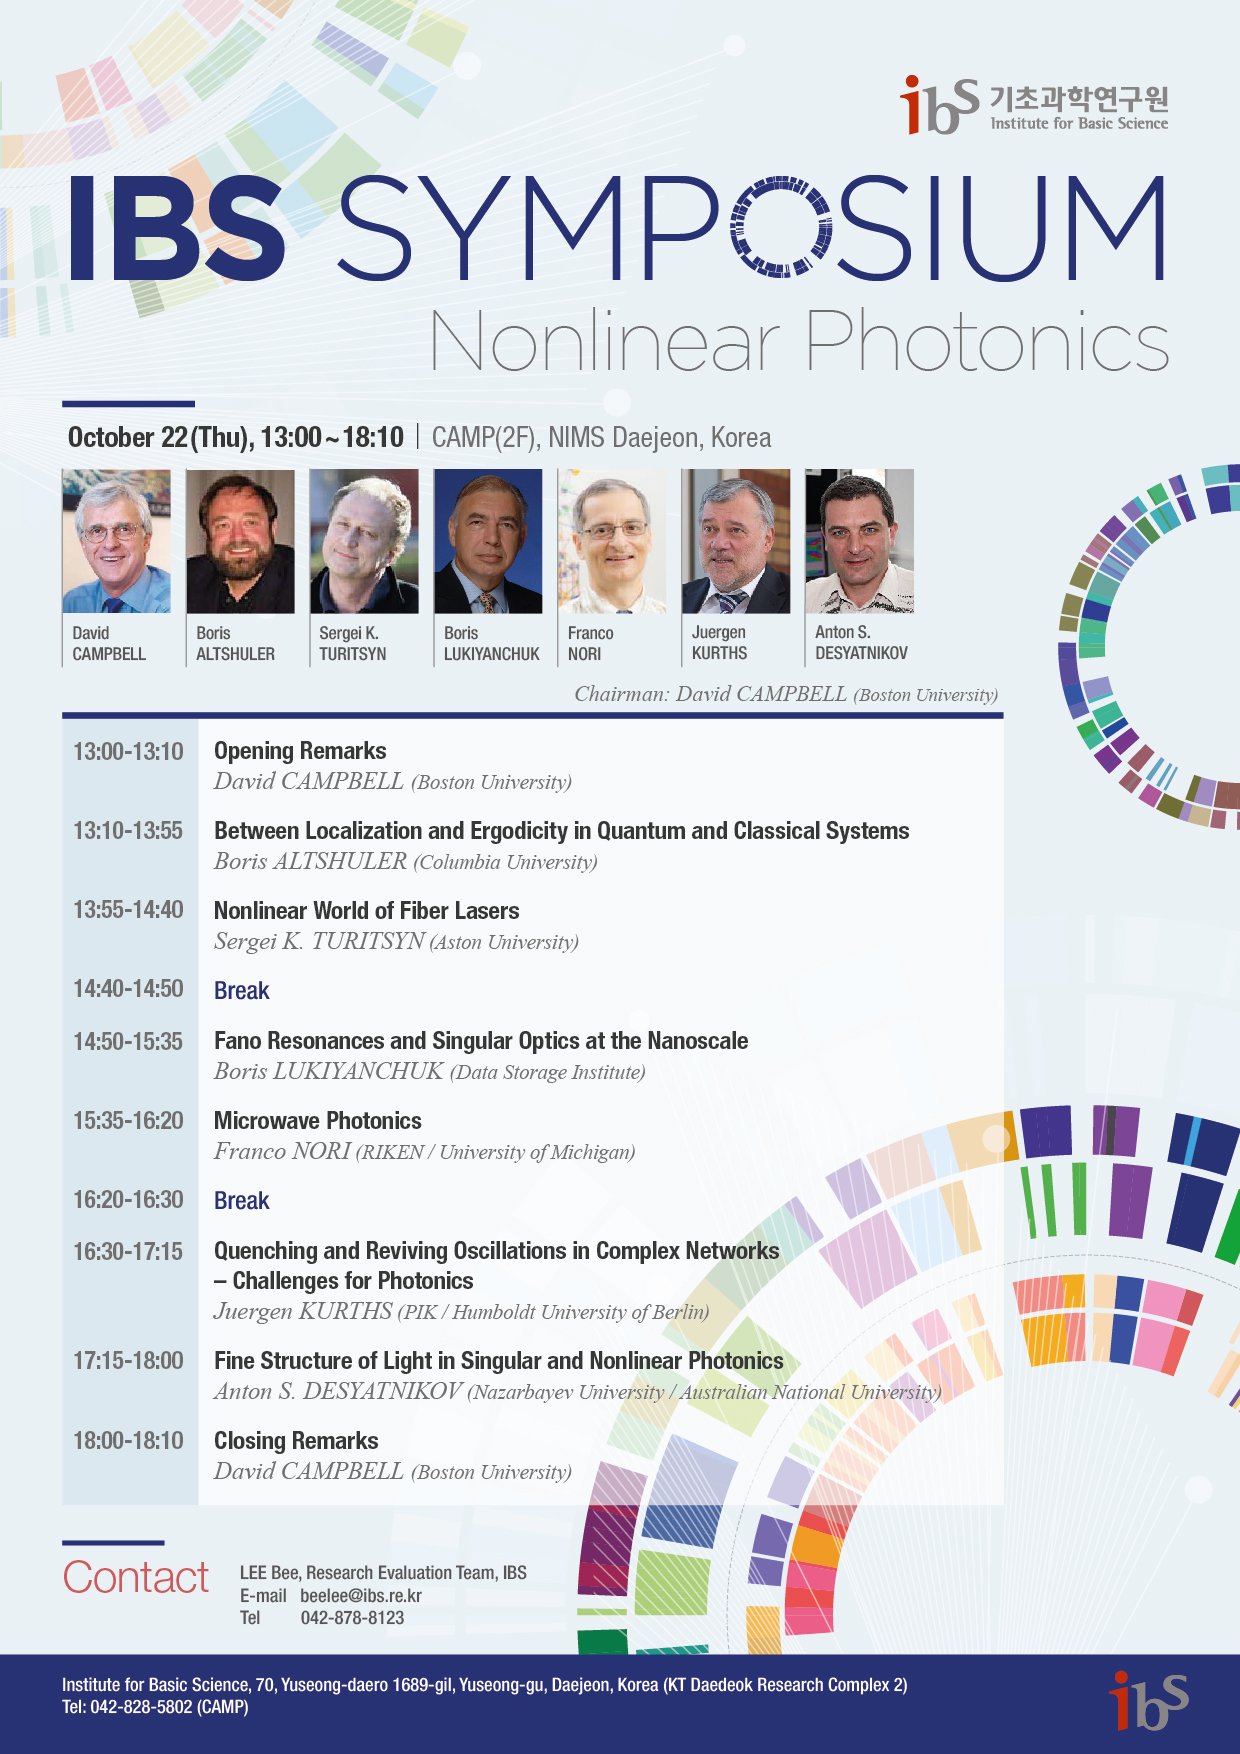 2015 Institute for Basic Science Symposium-Nonlinear Photonics 사진